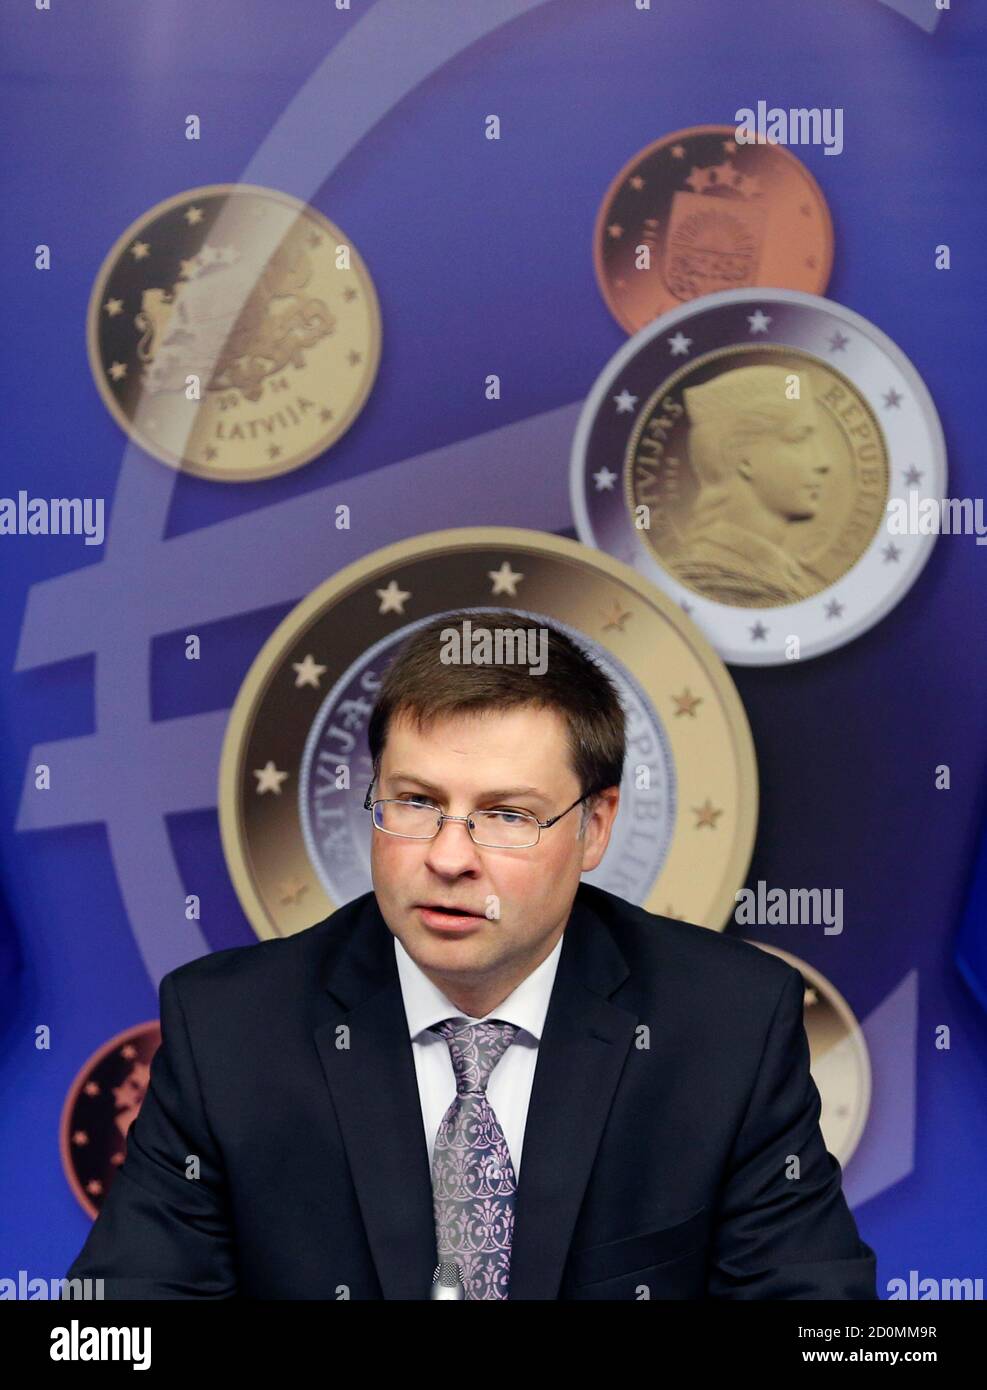 Latvia's Prime Minister Valdis Dombrovskis addresses a news conference on the adoption of the euro by Latvia at the European Union council building in Brussels July 9, 2013. The euro zone embraced tiny Latvia as its newest member on Tuesday, eager to show that the bloc is not disintegrating while doubts remain about southern Europe's ability to overcome more than three years of crisis.   REUTERS/Francois Lenoir (BELGIUM - Tags: POLITICS BUSINESS) Stock Photo